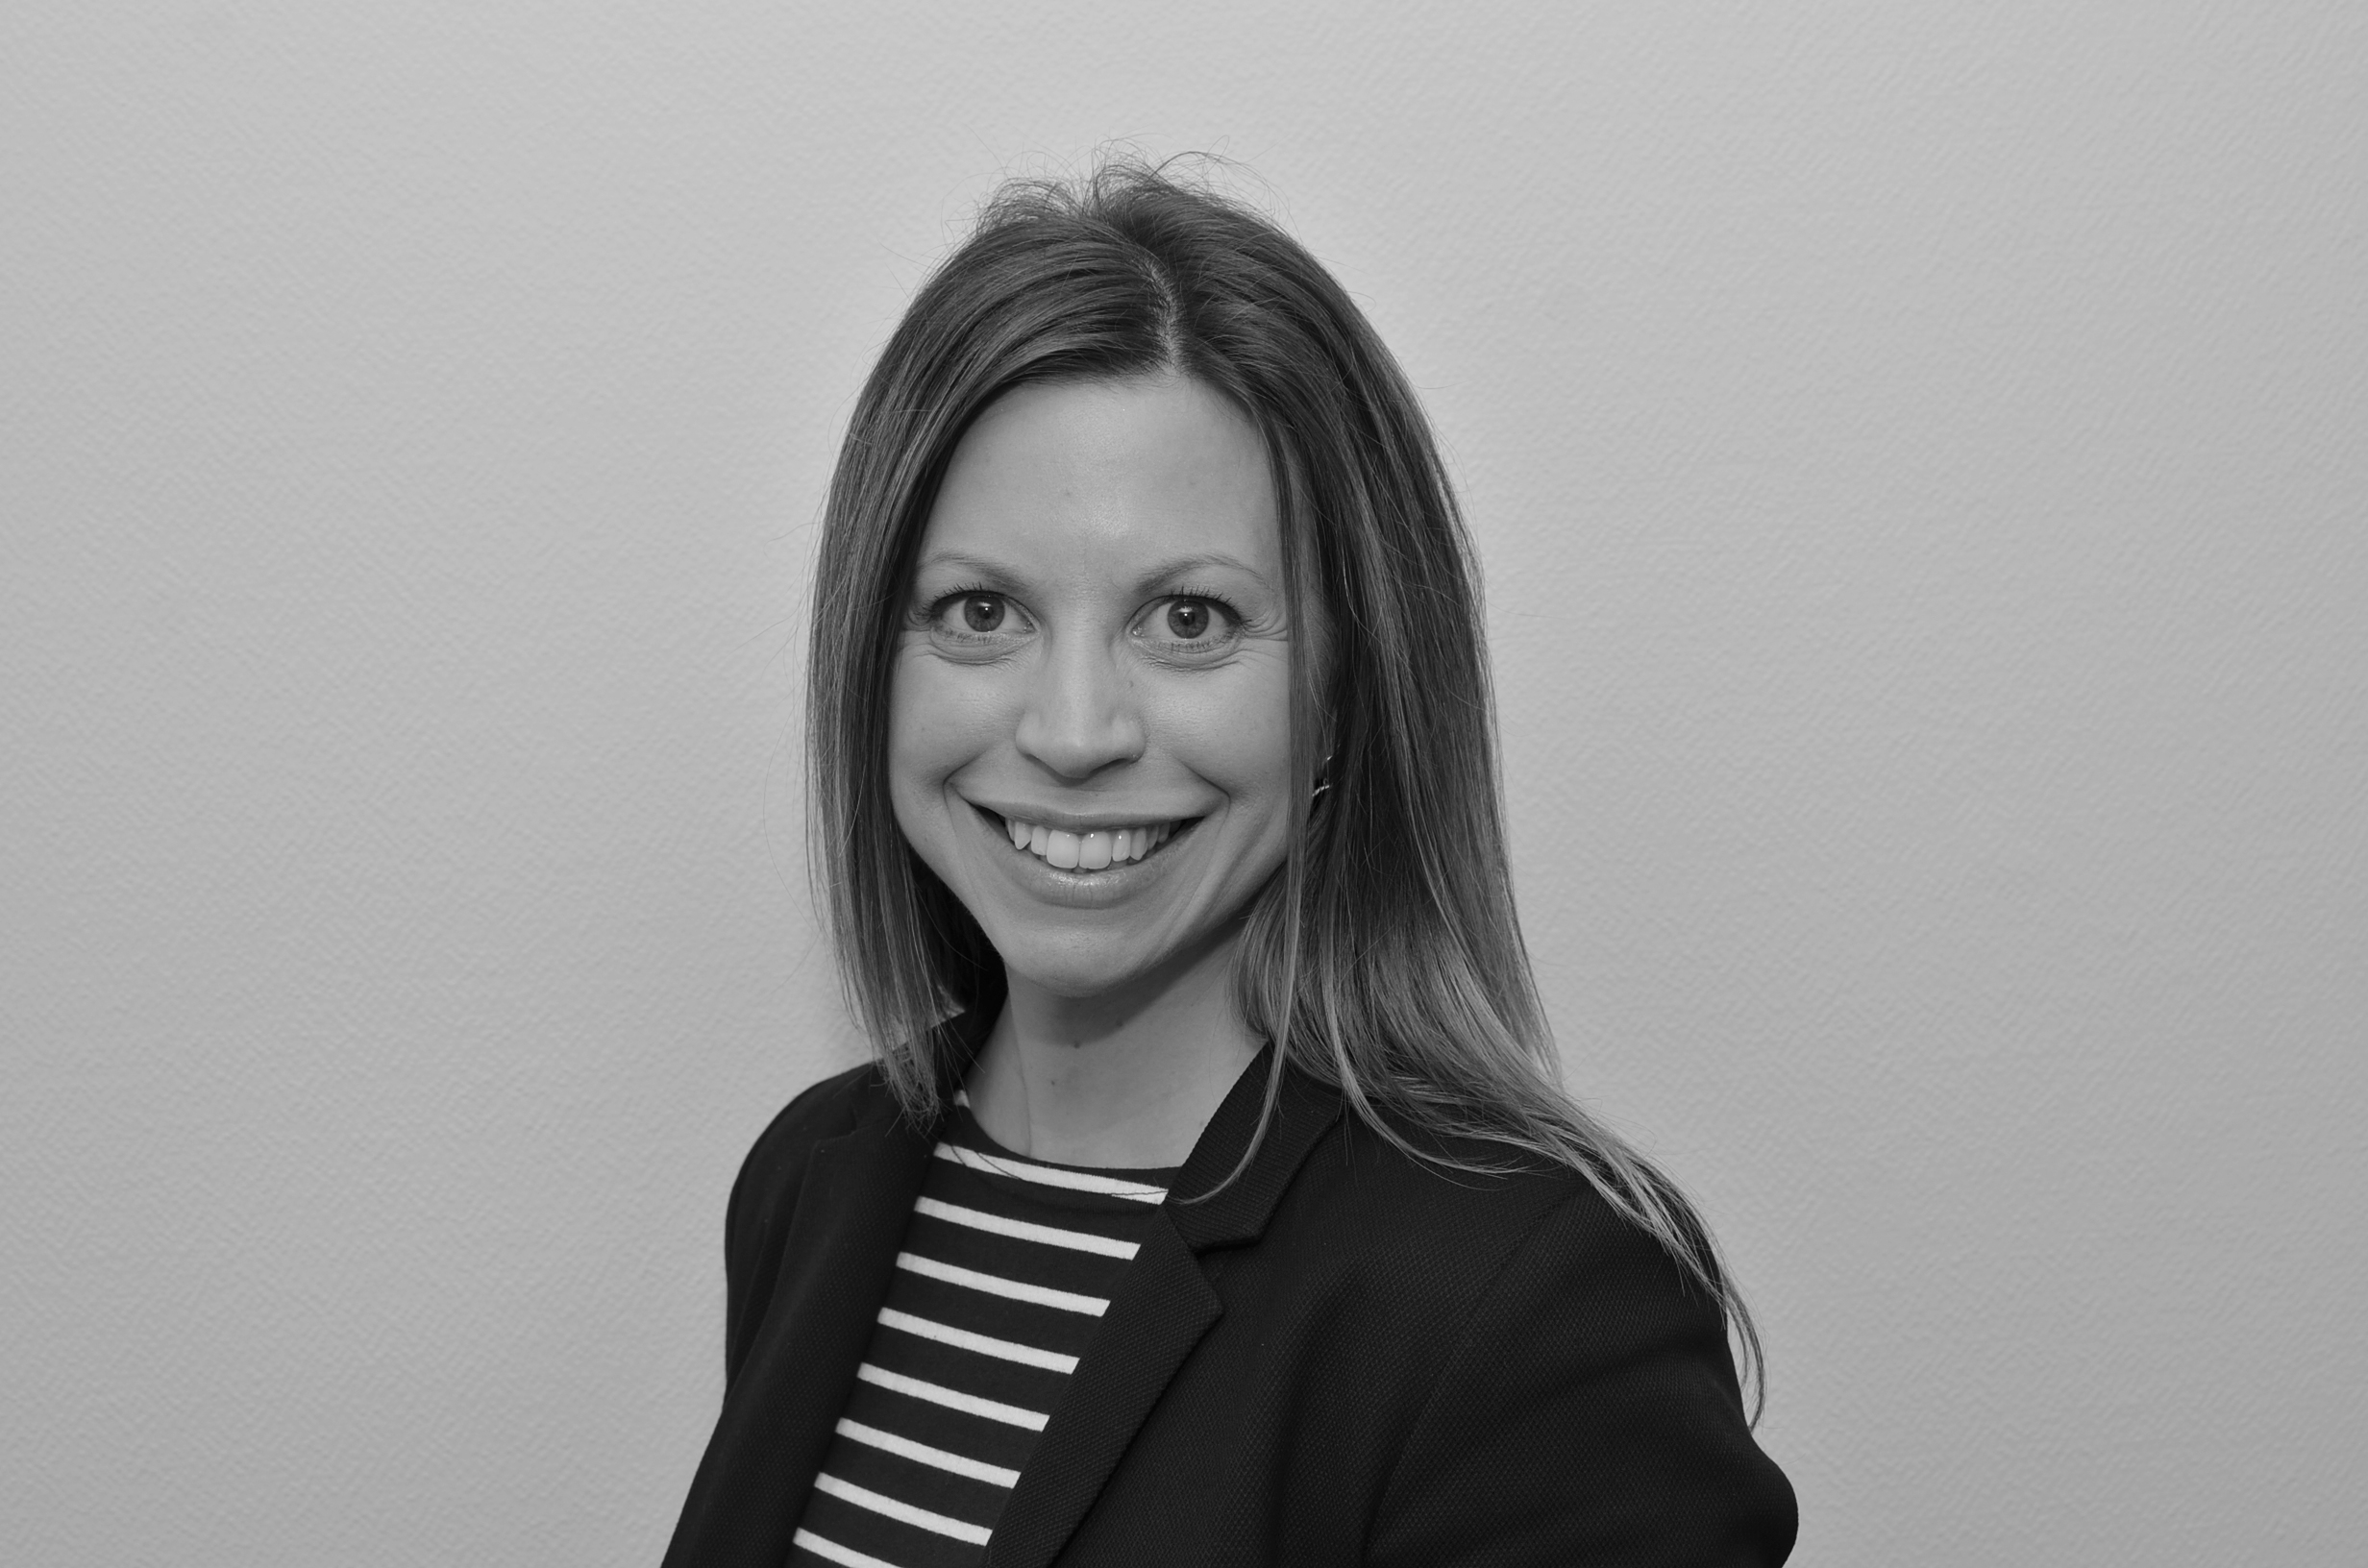 Alice Litherland, COMPANY DIRECTOR & VALUATIONS MANAGER